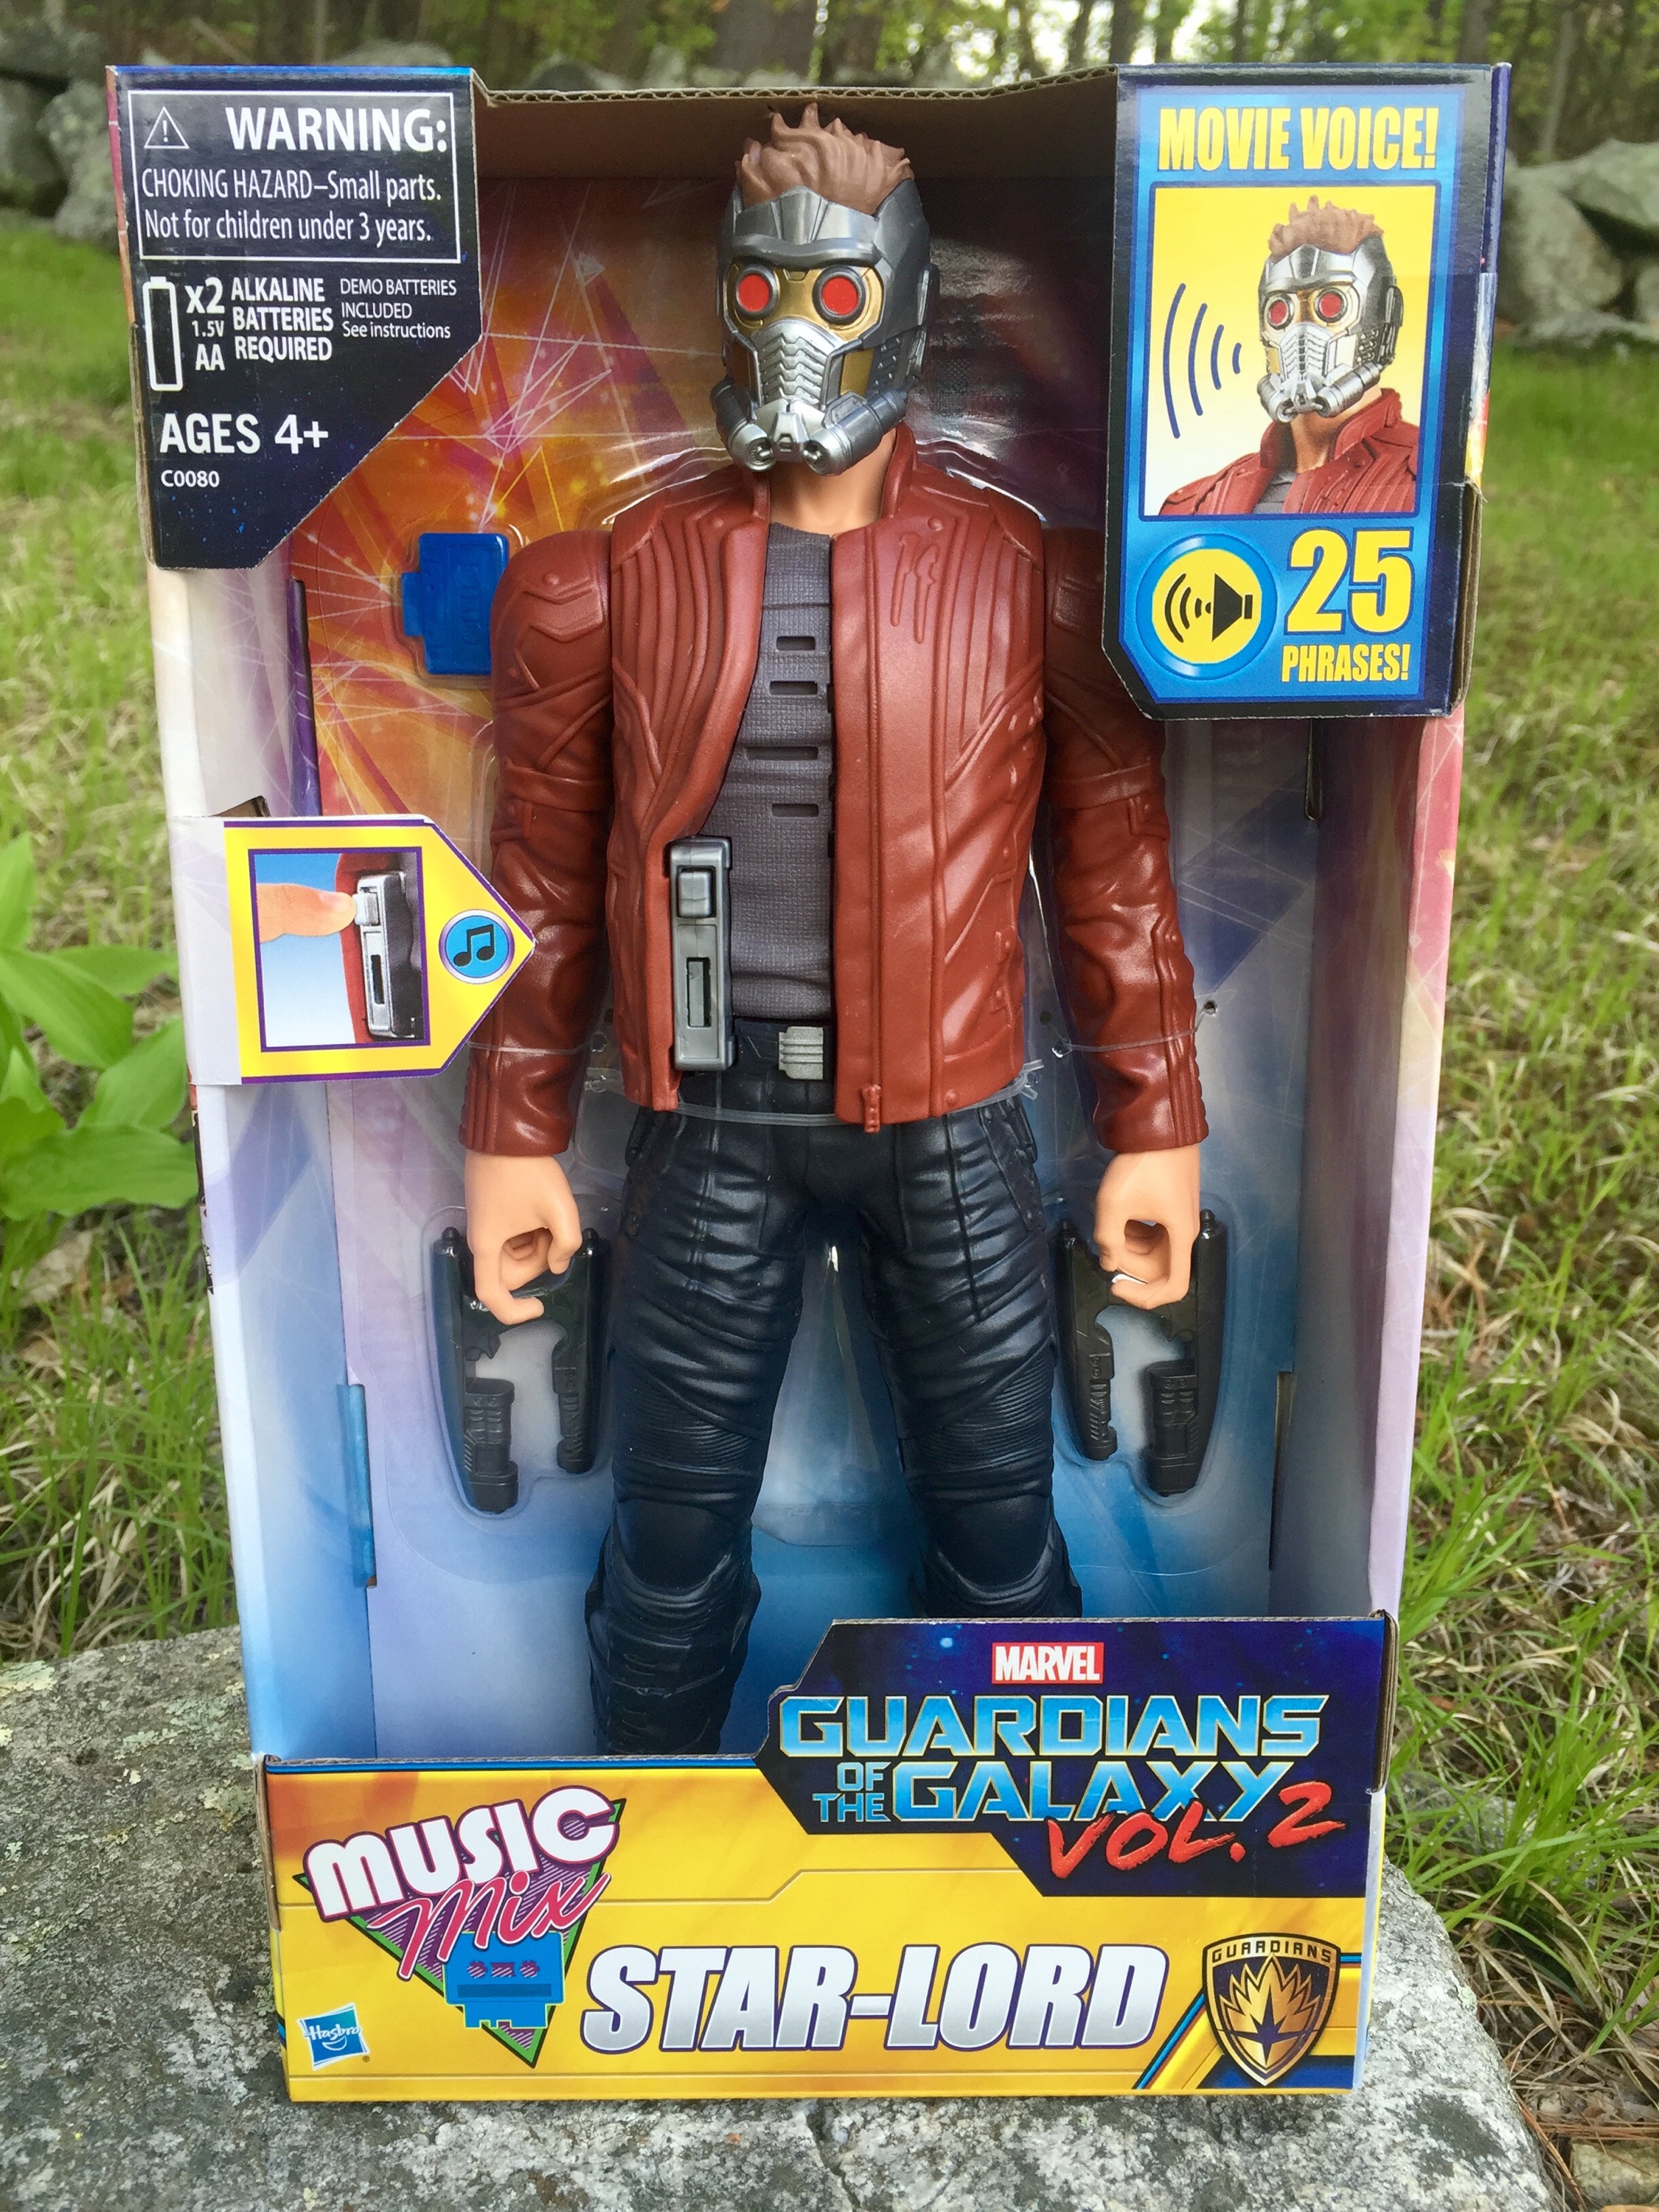 Marvel Titan Hero Series STAR-LORD W/Weapons 12in Action Figure ~ Guardians